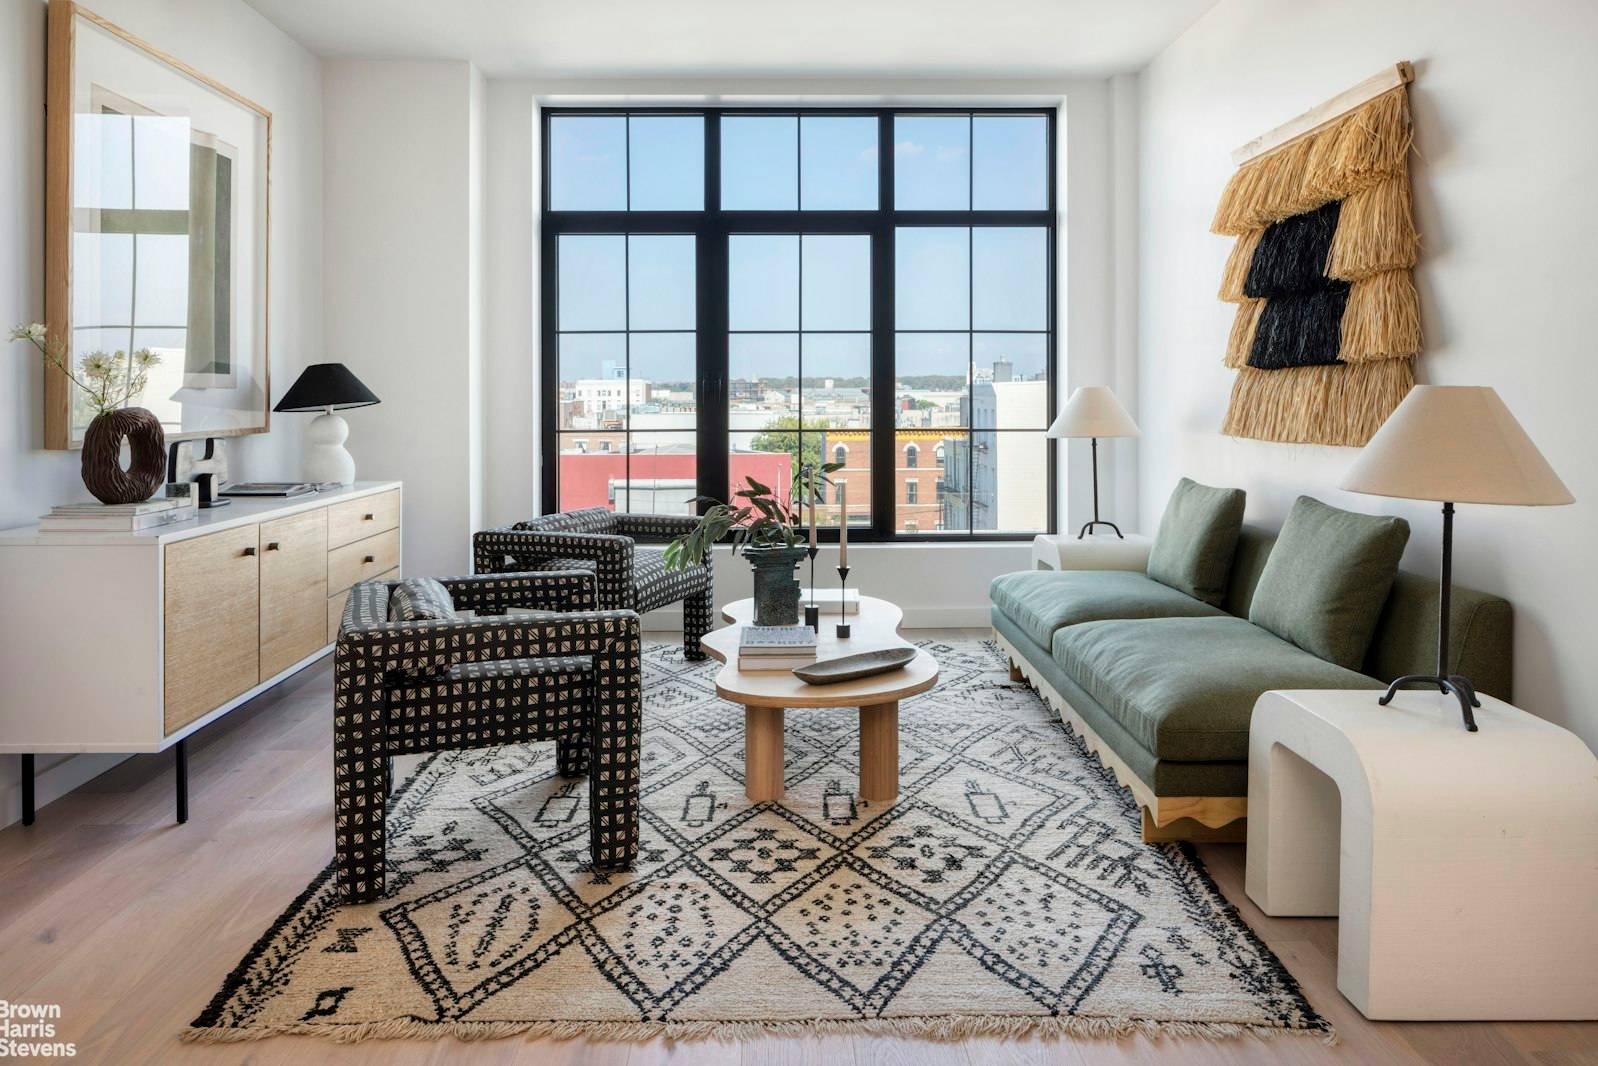 Welcome to The Lumin, a newly constructed boutique scale condominium featuring a traditional red brick fa ade with oversized warehouse style windows.